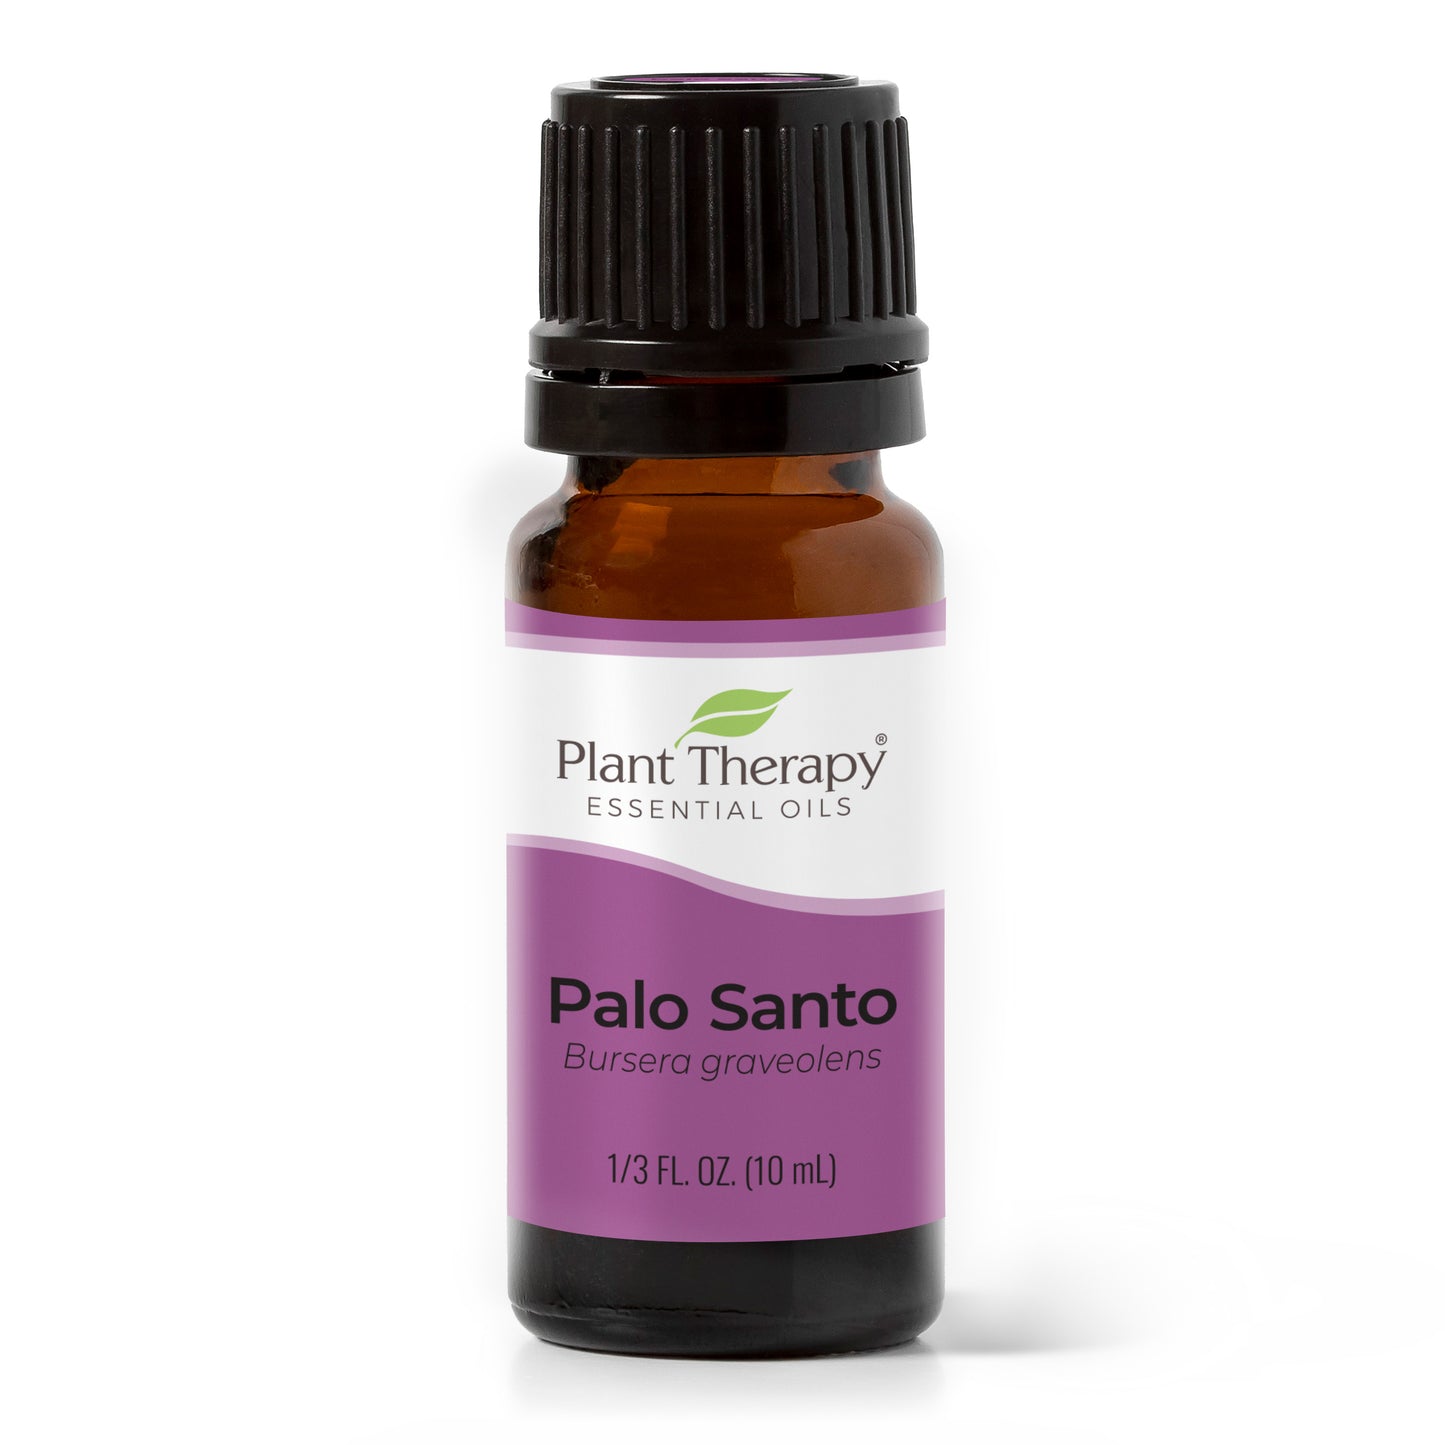 What are the benefits of Palo Santo essential oil? What should one